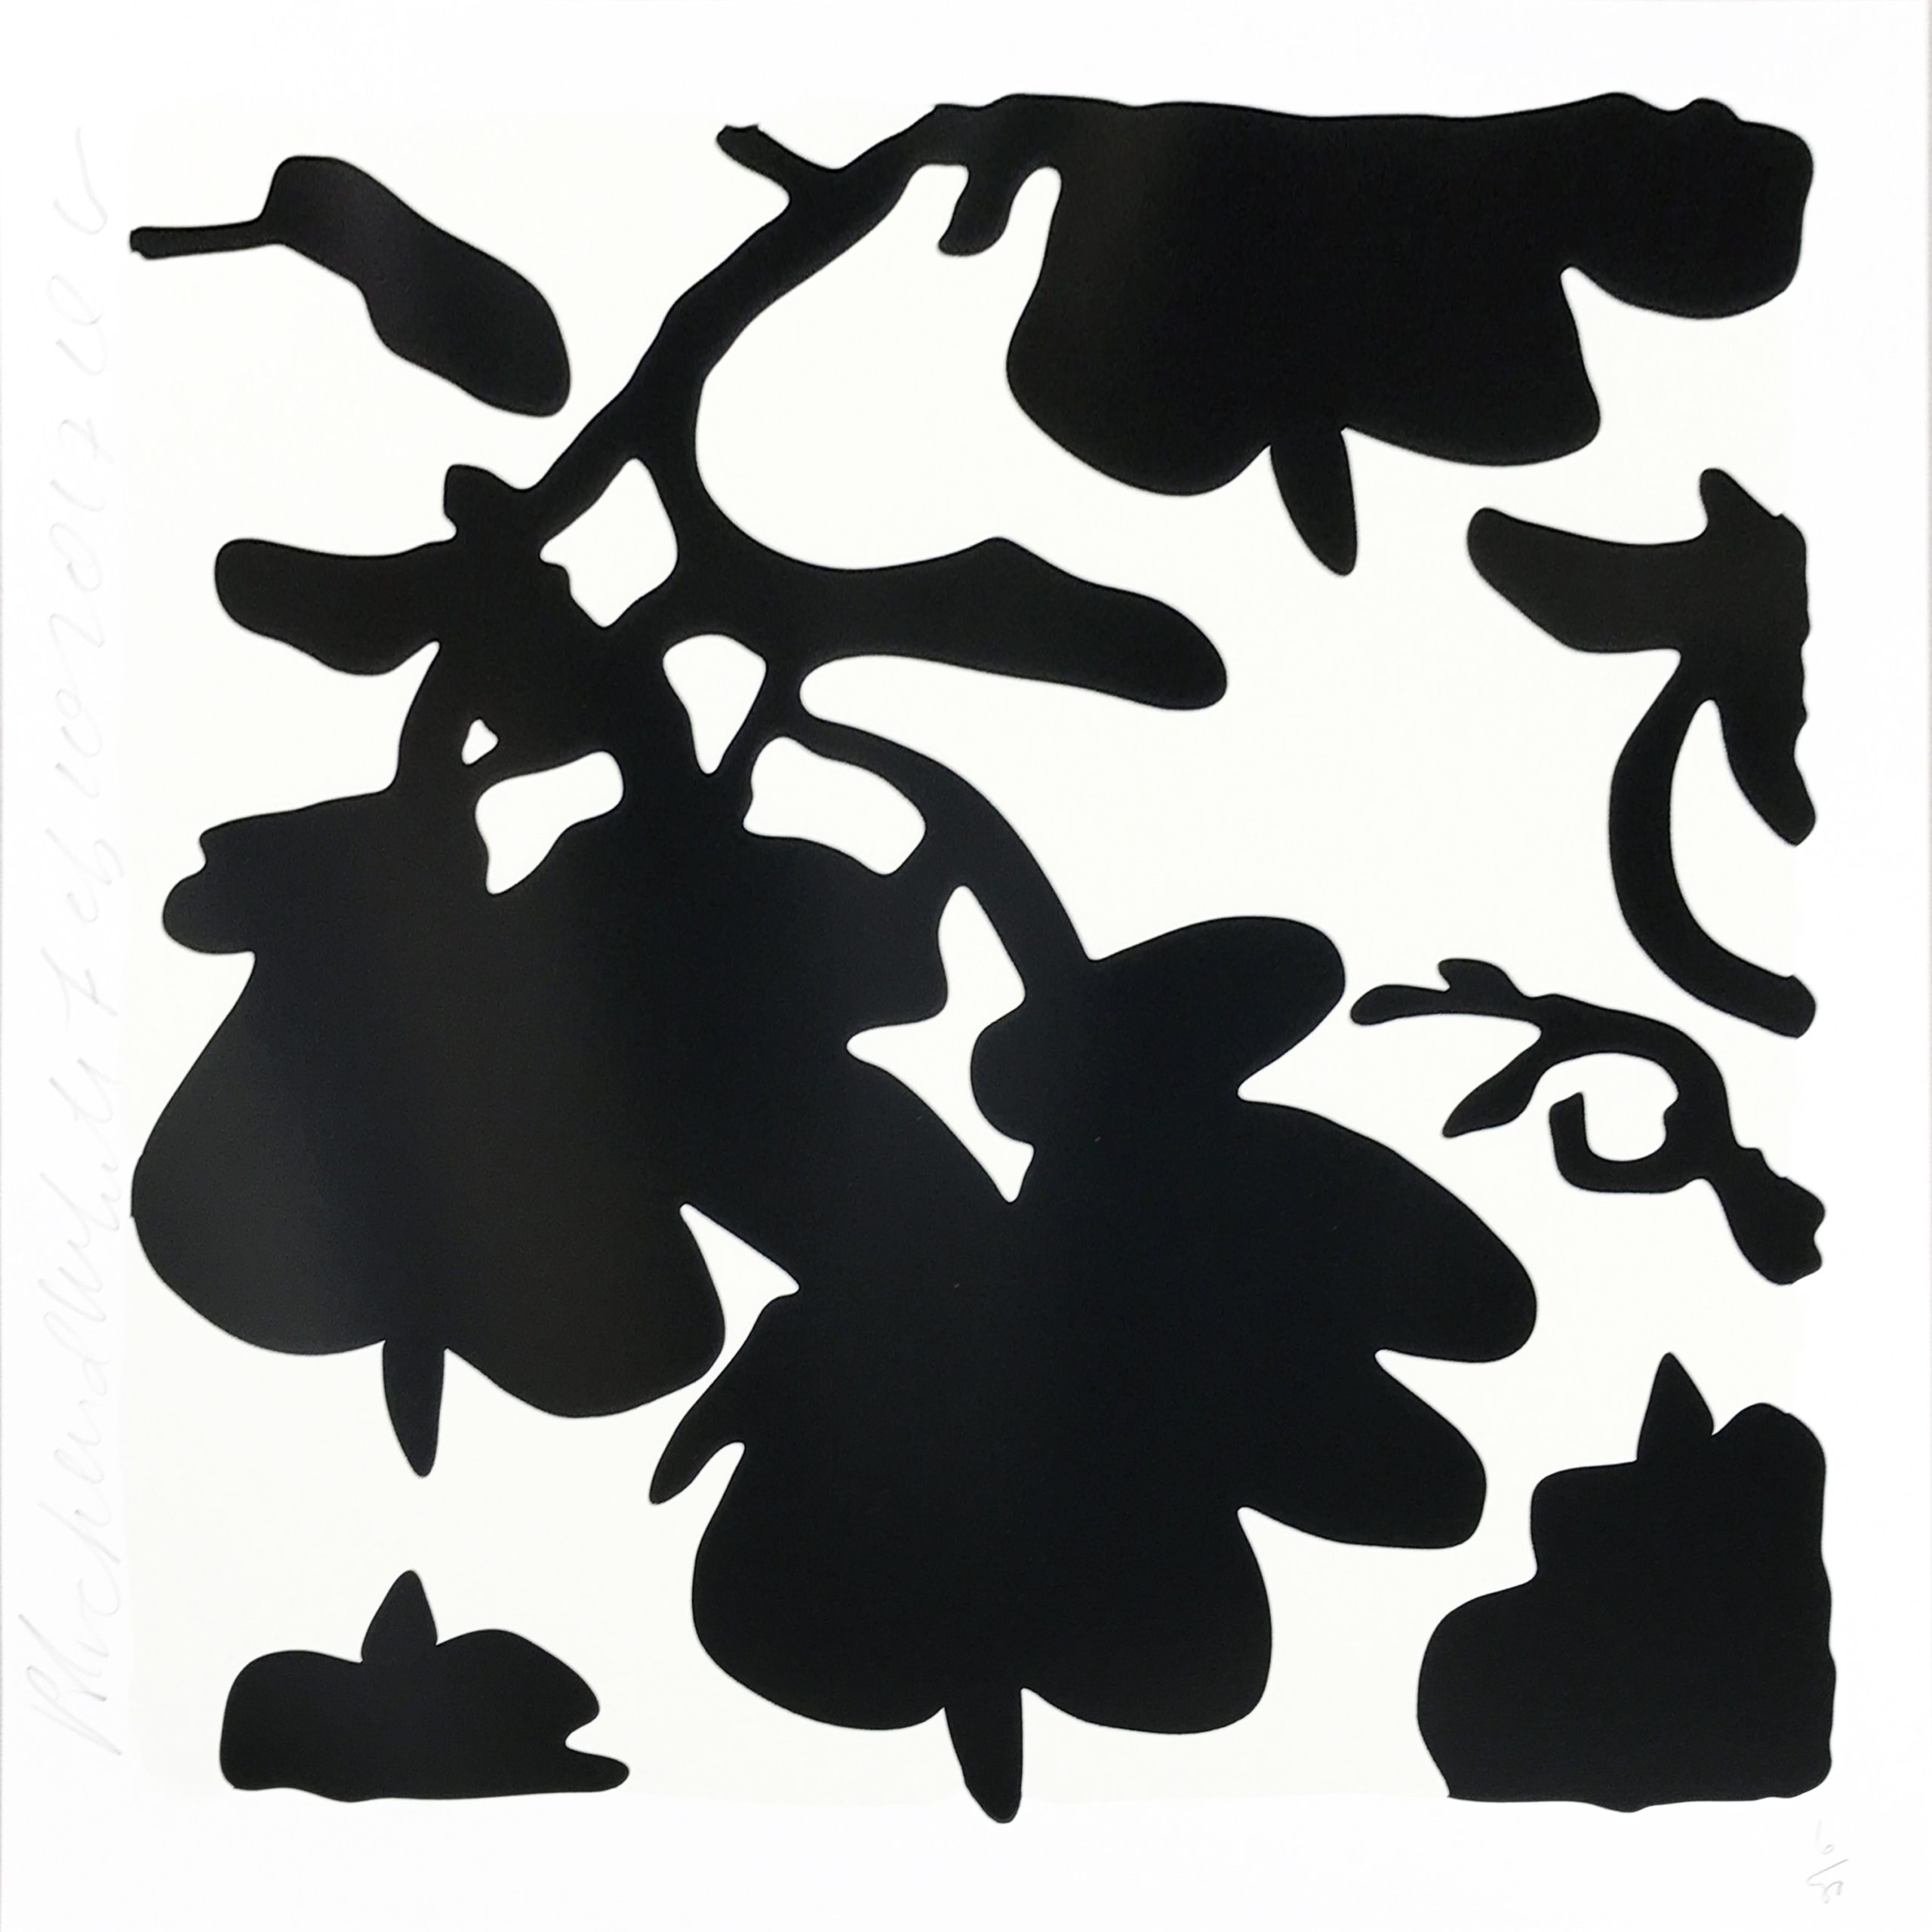 Donald Sultan | Lantern Flowers | Black With White | 2013 | Image of Artists' work.